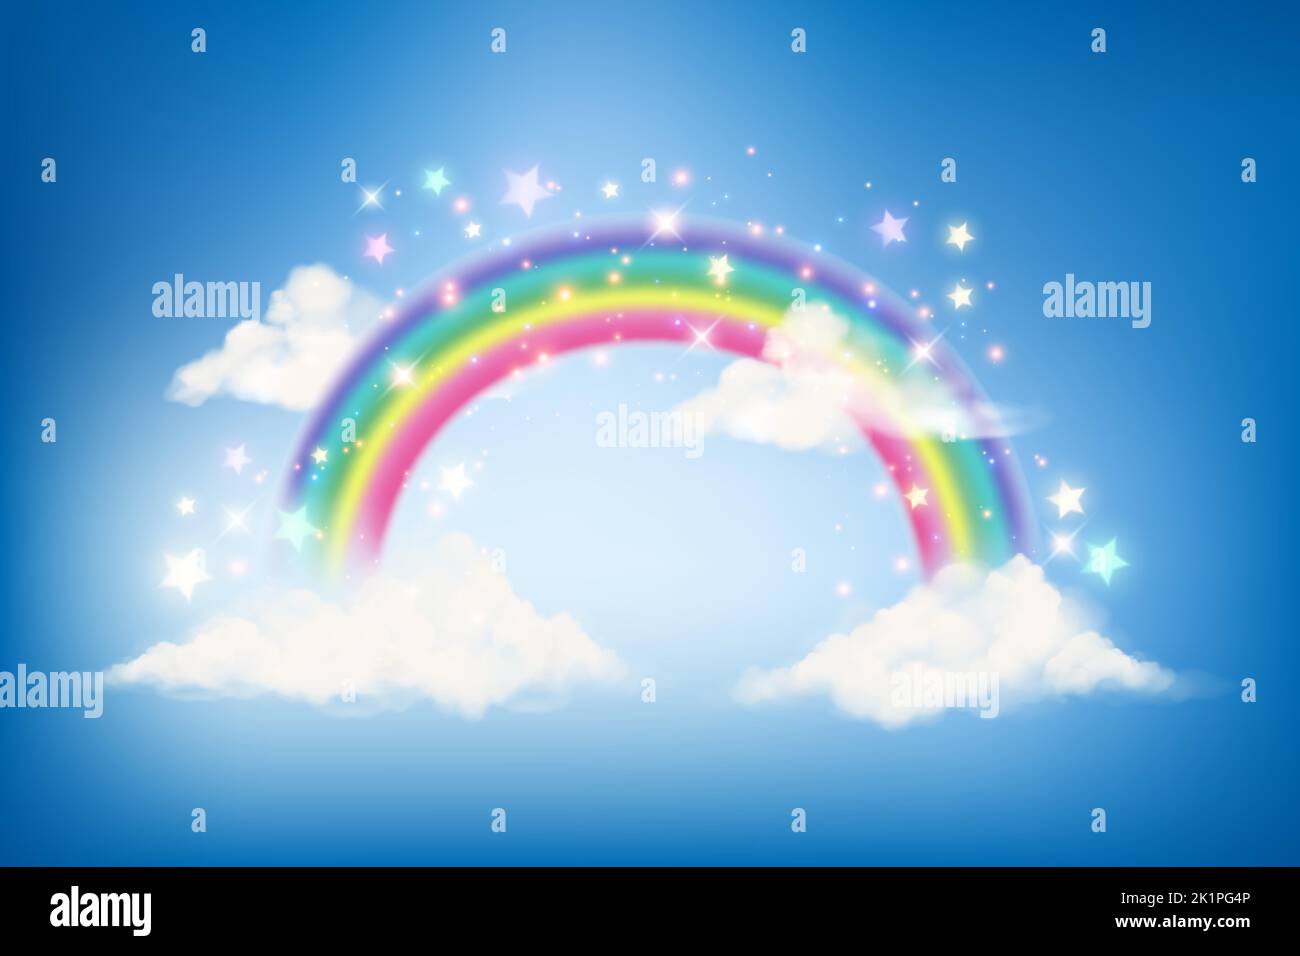 Fantasy rainbow unicorn background with clouds on blue sky. Magical landscape, abstract fabulous wallpaper with stars and sparkles. Arched realistic Stock Vector